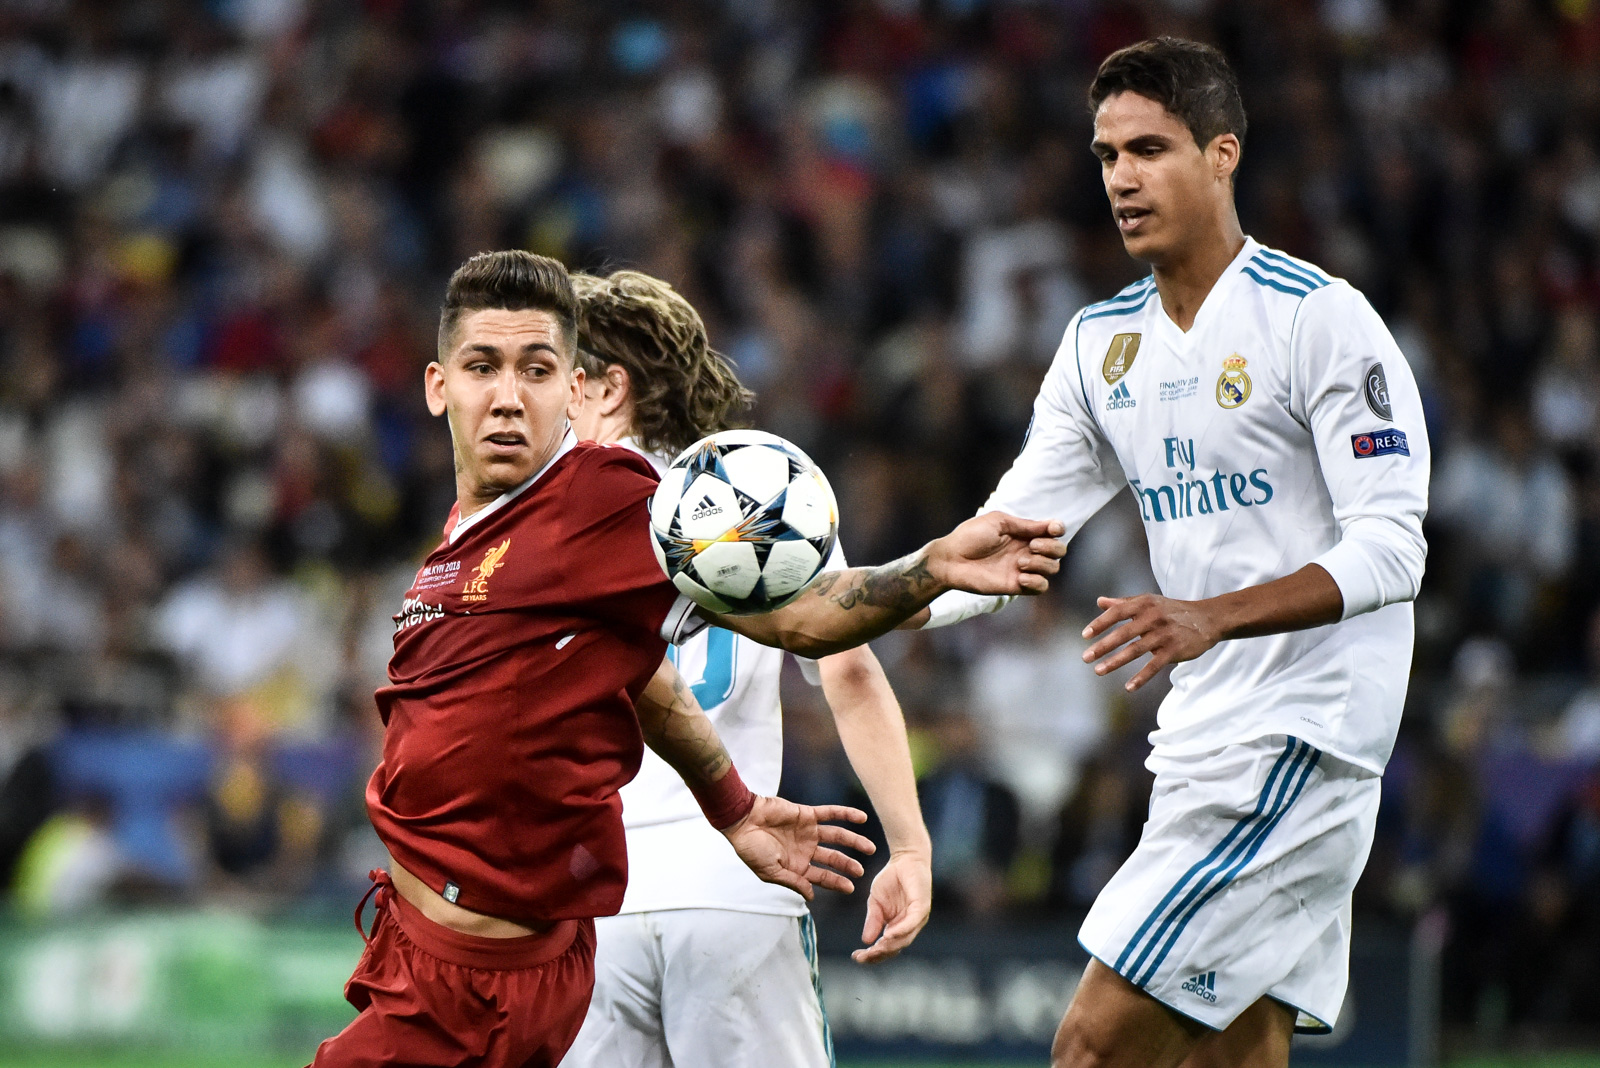 Football teams Real Madrid and Liverpool vie for the prestigious European football trophy, the UEFA Champions League cup, on May 26 in Ukraine&#8217;s main sports arena, Olimpiysky Stadium.